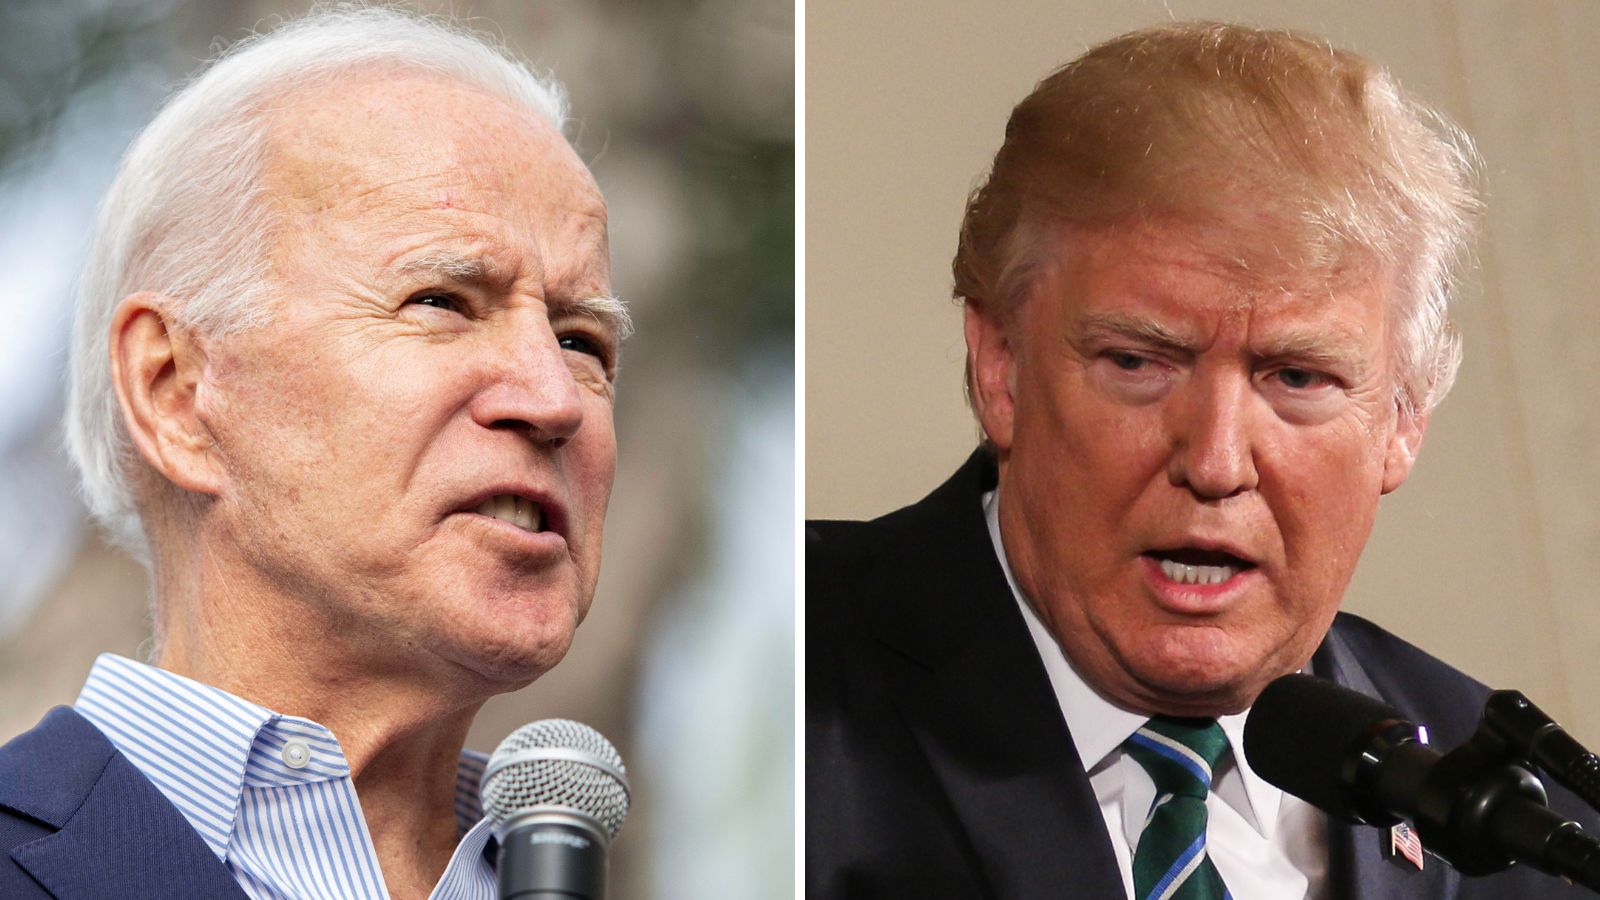 “Delusional” and “Out of Touch”: Biden’s Campaign Flounders During GOP Surge